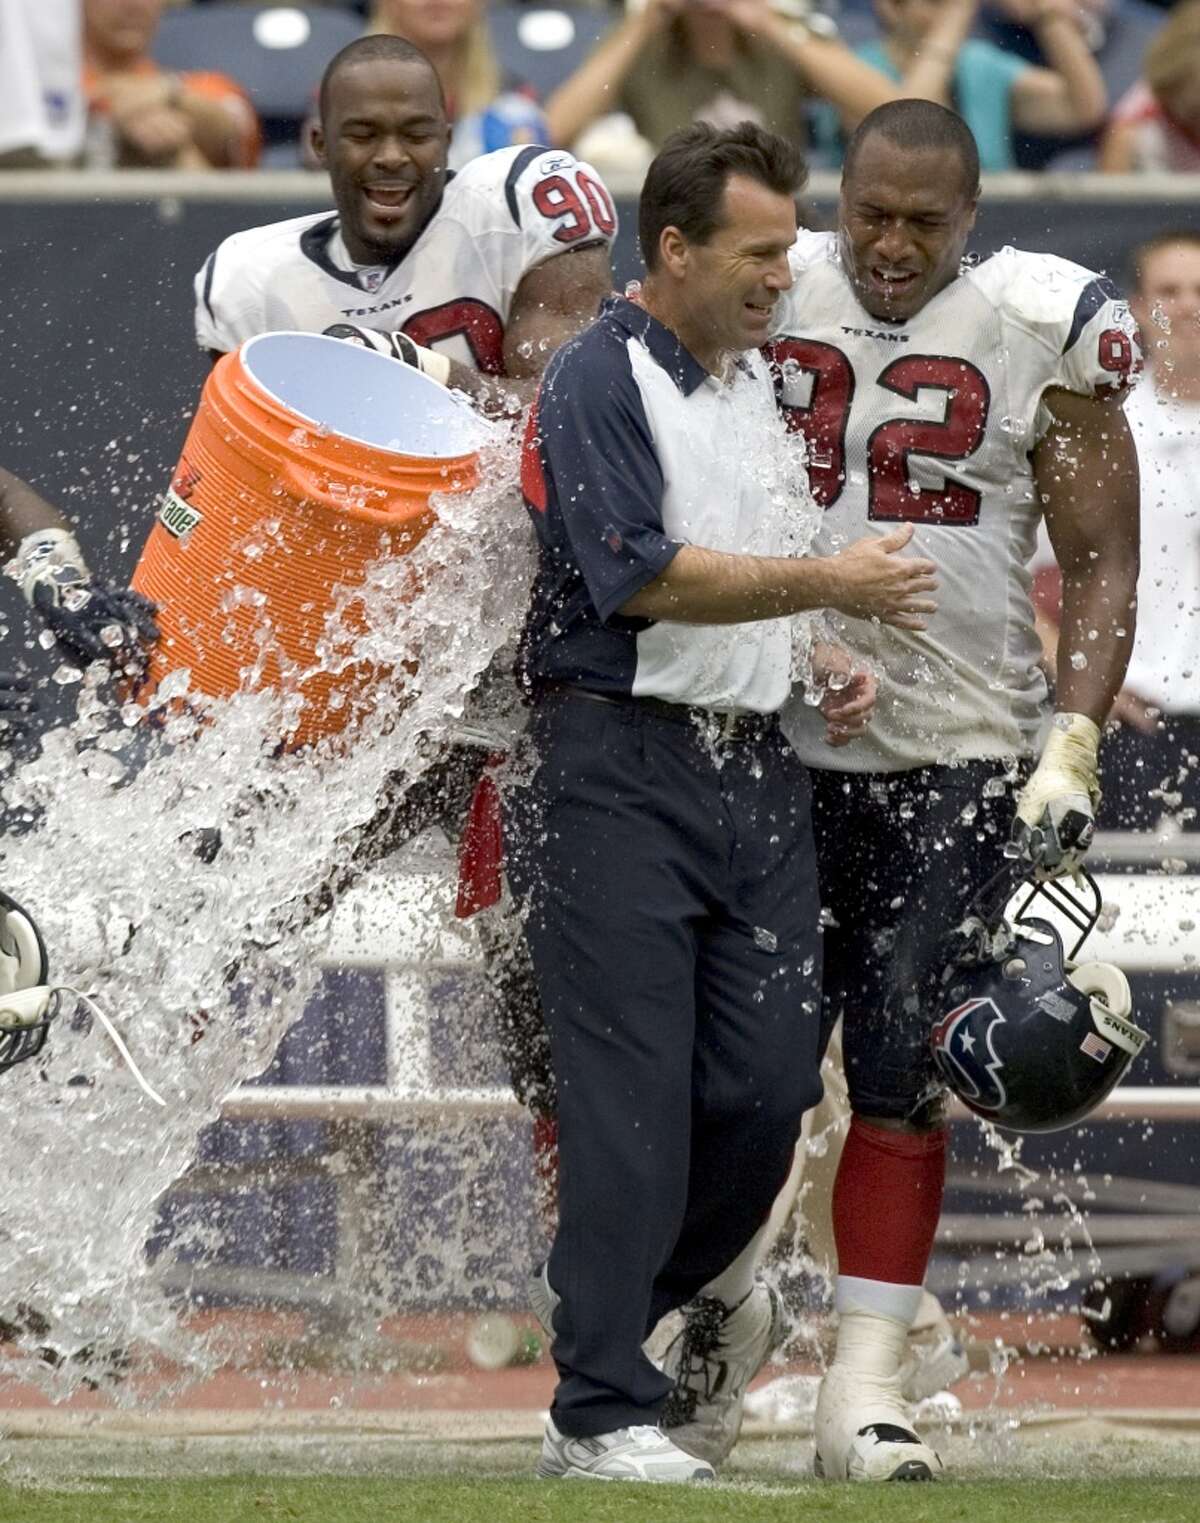 Gary Kubiak, center, is splashed with water by DeMeco Ryans (out of photo), Mario Williams (90) and Anthony Weaver (92) after the Texans beat the Miami Dolphins 17-15 on Oct. 1, 2006 to give Kubiak his first win as Texans coach.